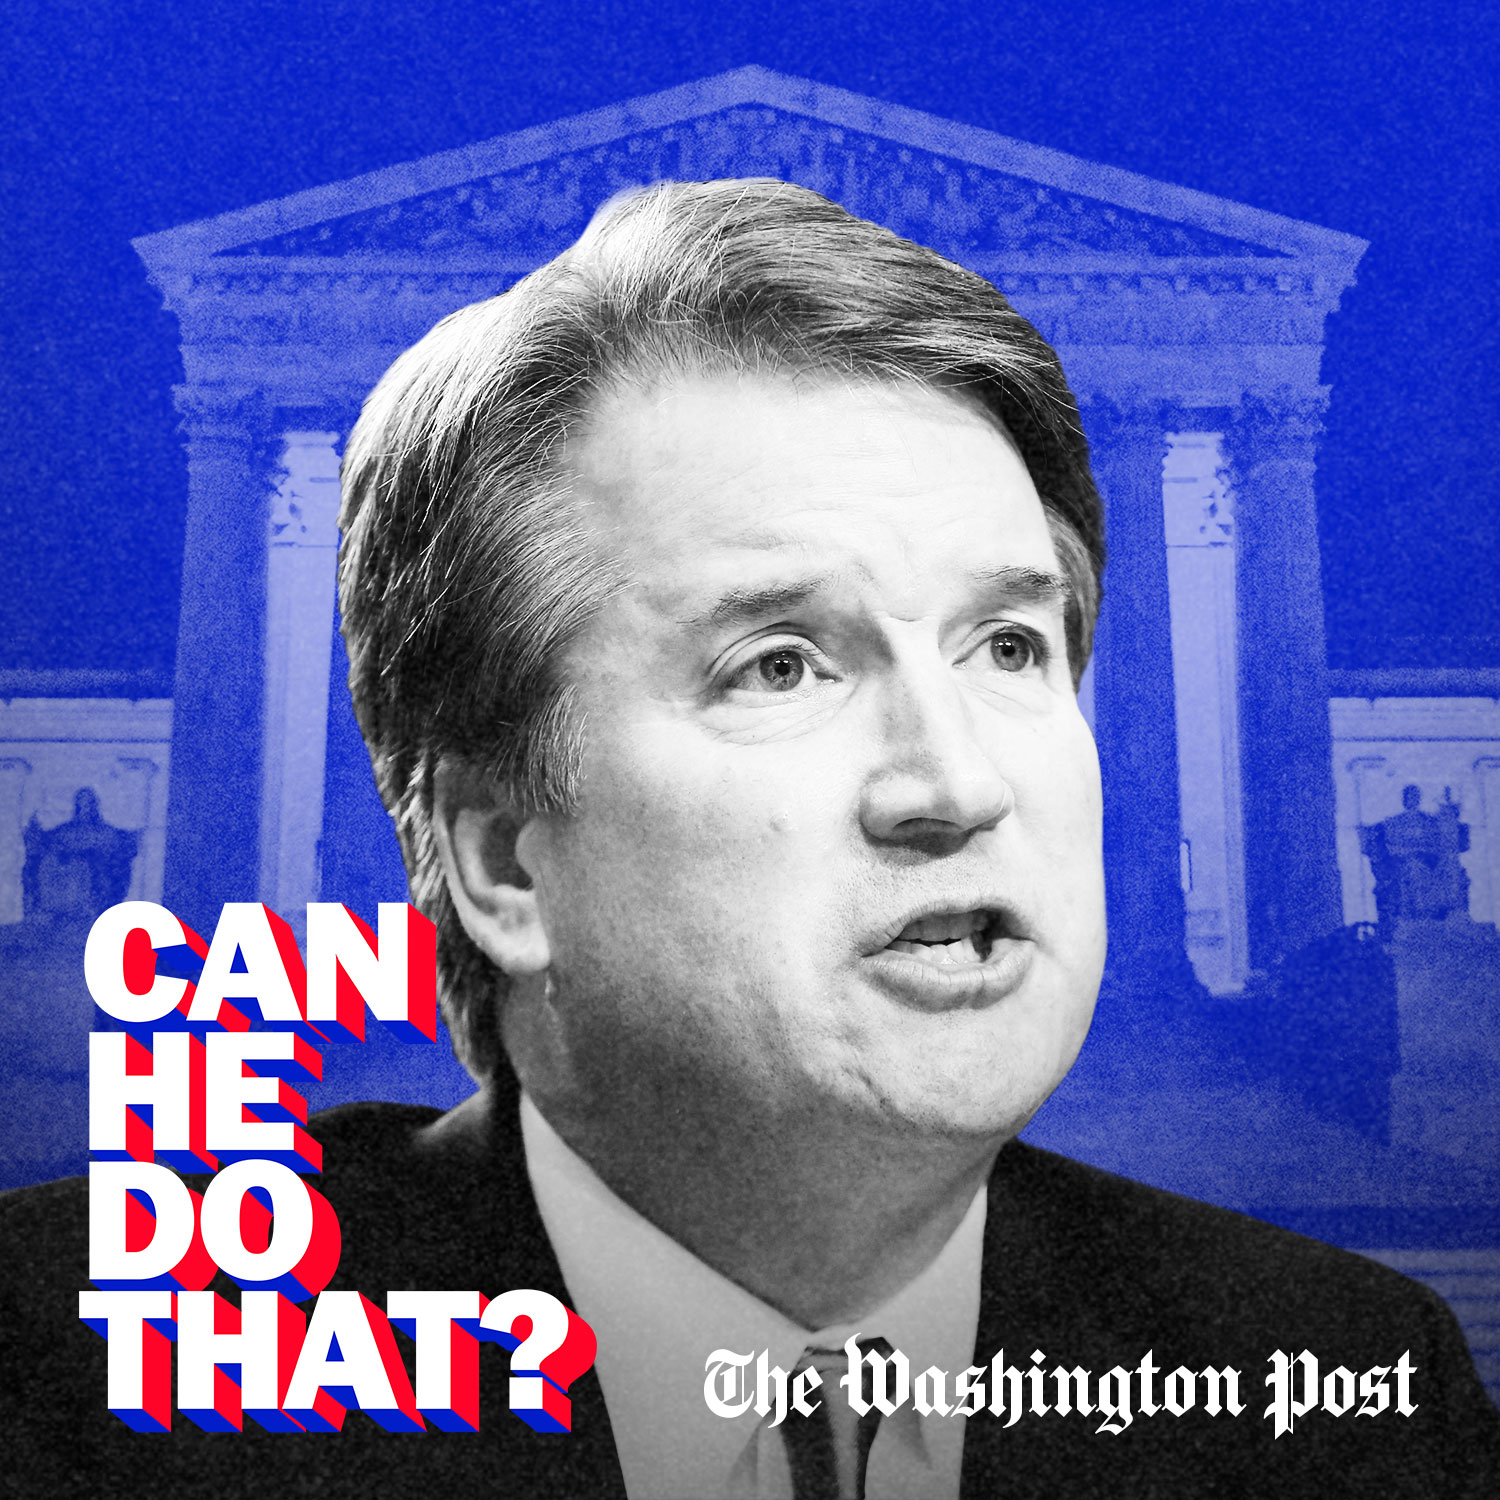 Kavanaugh and Ford will testify at the Senate. Here’s what to expect.